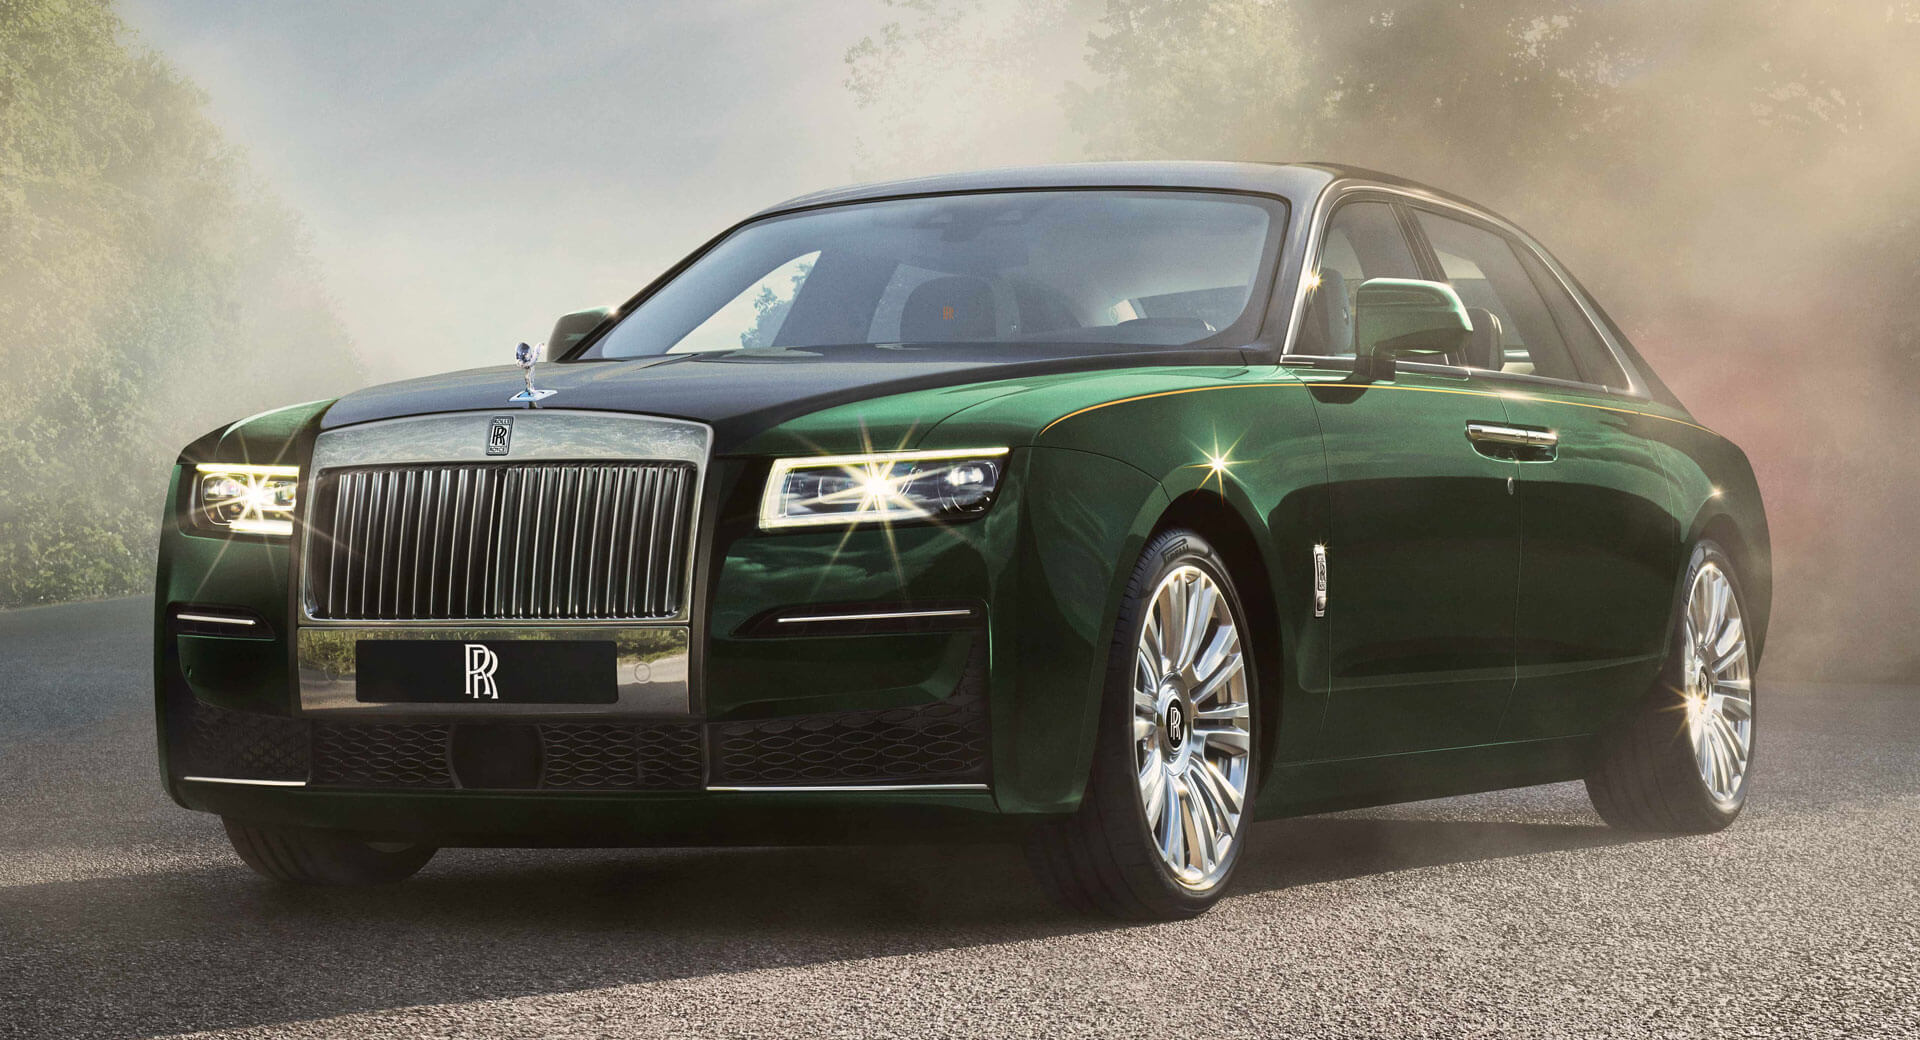 THE NEW ROLLS-ROYCE GHOST